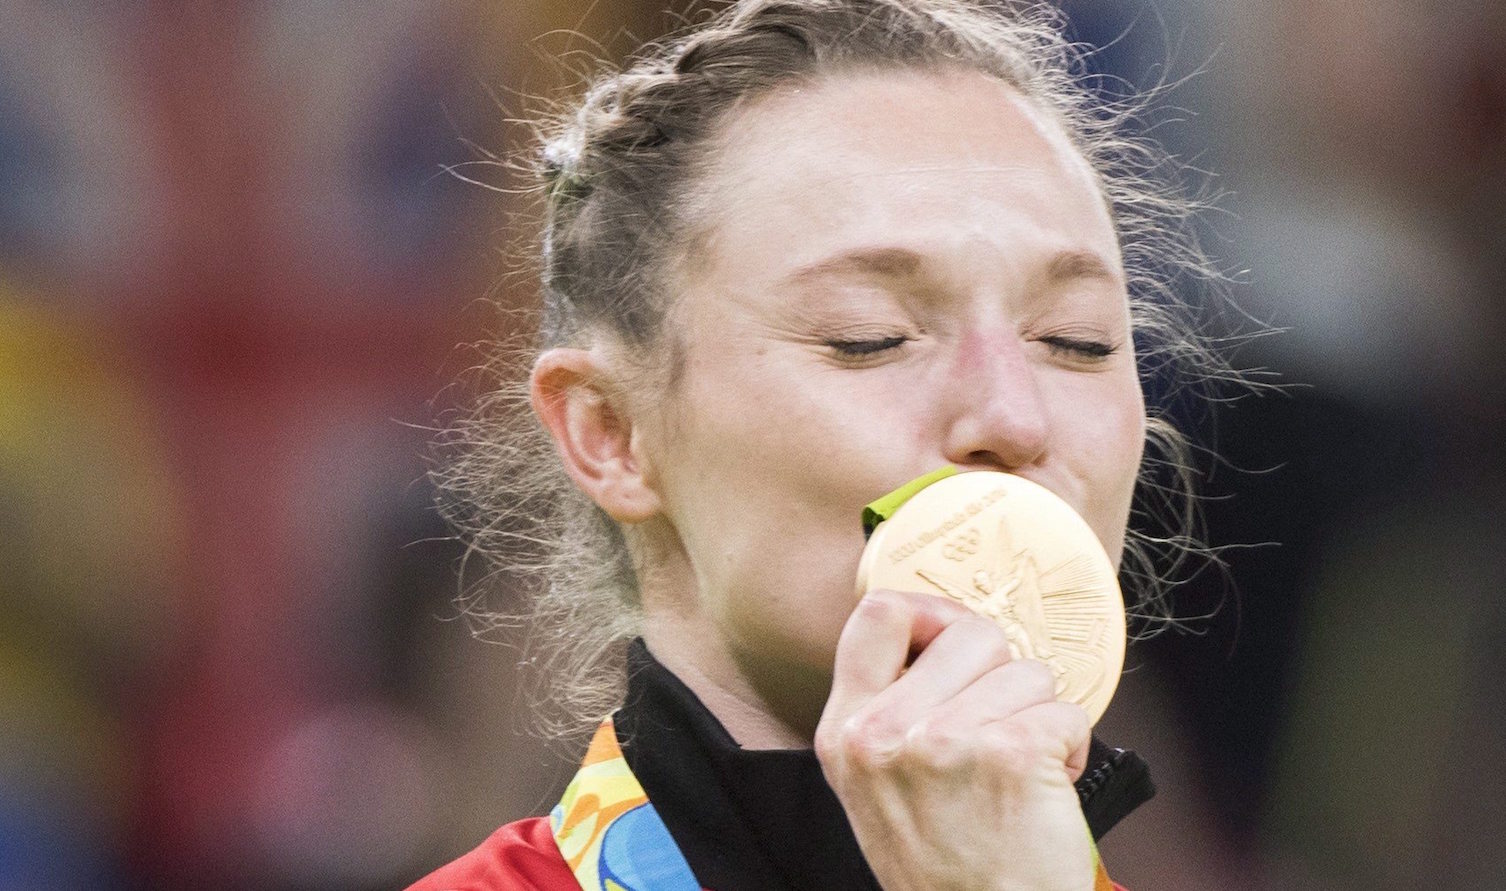 Canada's Rosie MacLennan, from King City, Ont., kisses her gold medal after winning the trampoline gymnastics competition at the 2016 Summer Olympics Friday, August 12, 2016 in Rio de Janeiro, Brazil.THE CANADIAN PRESS/Ryan Remiorz